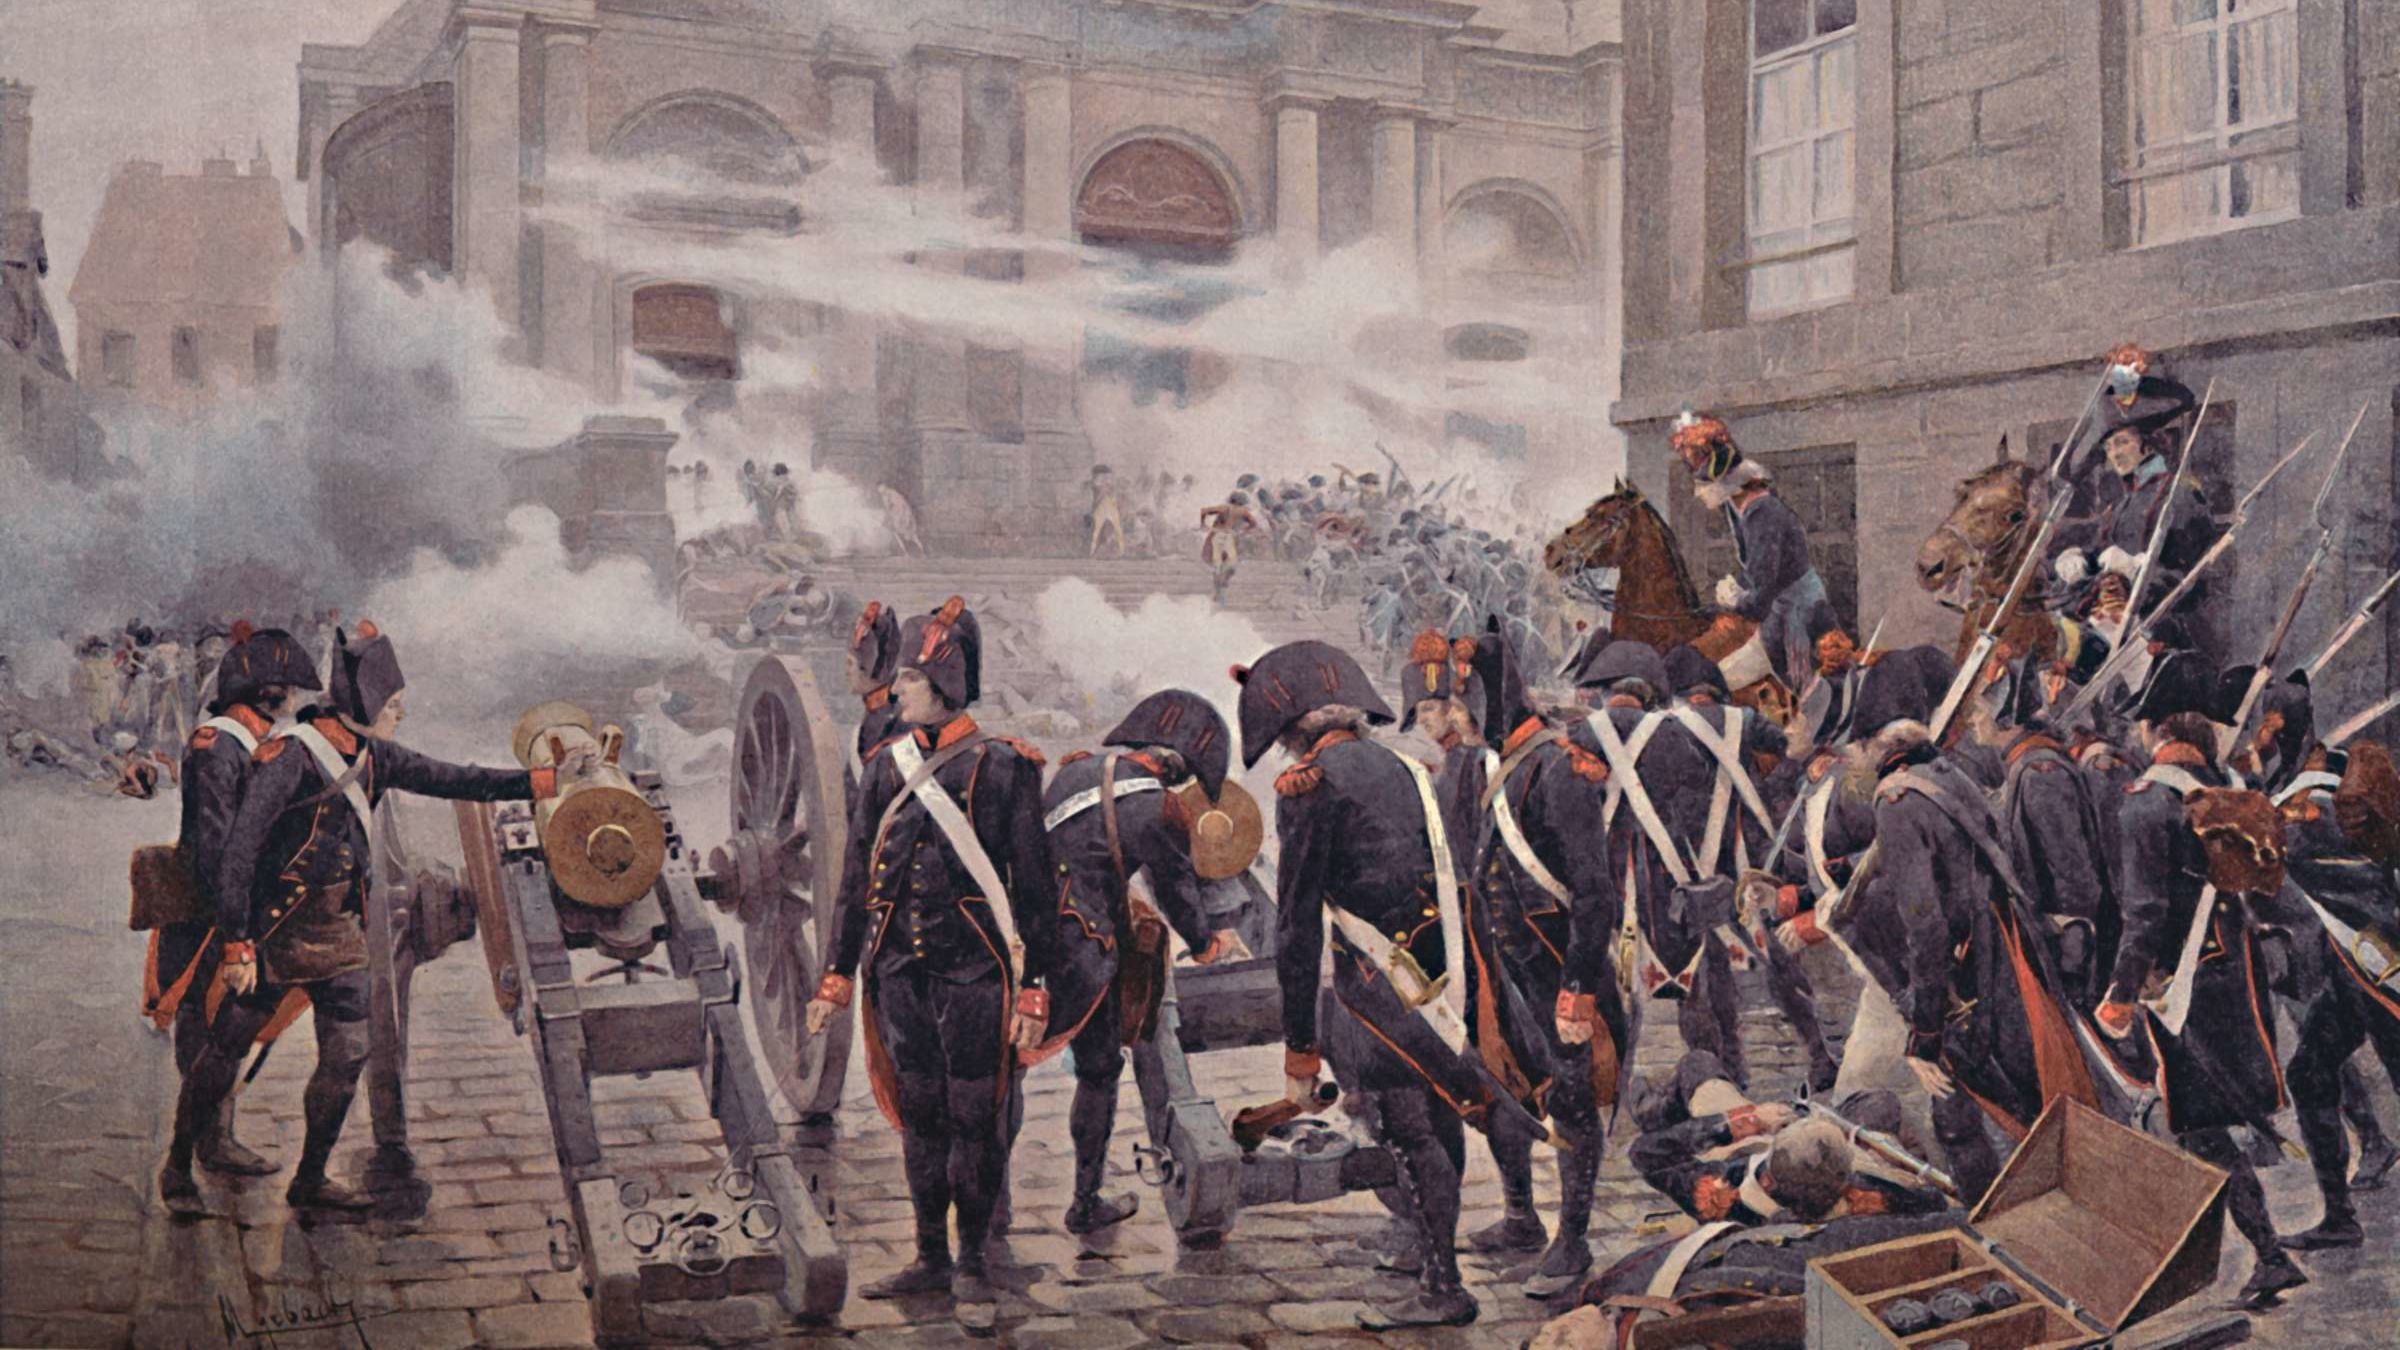 5 Misconceptions About the French Revolution